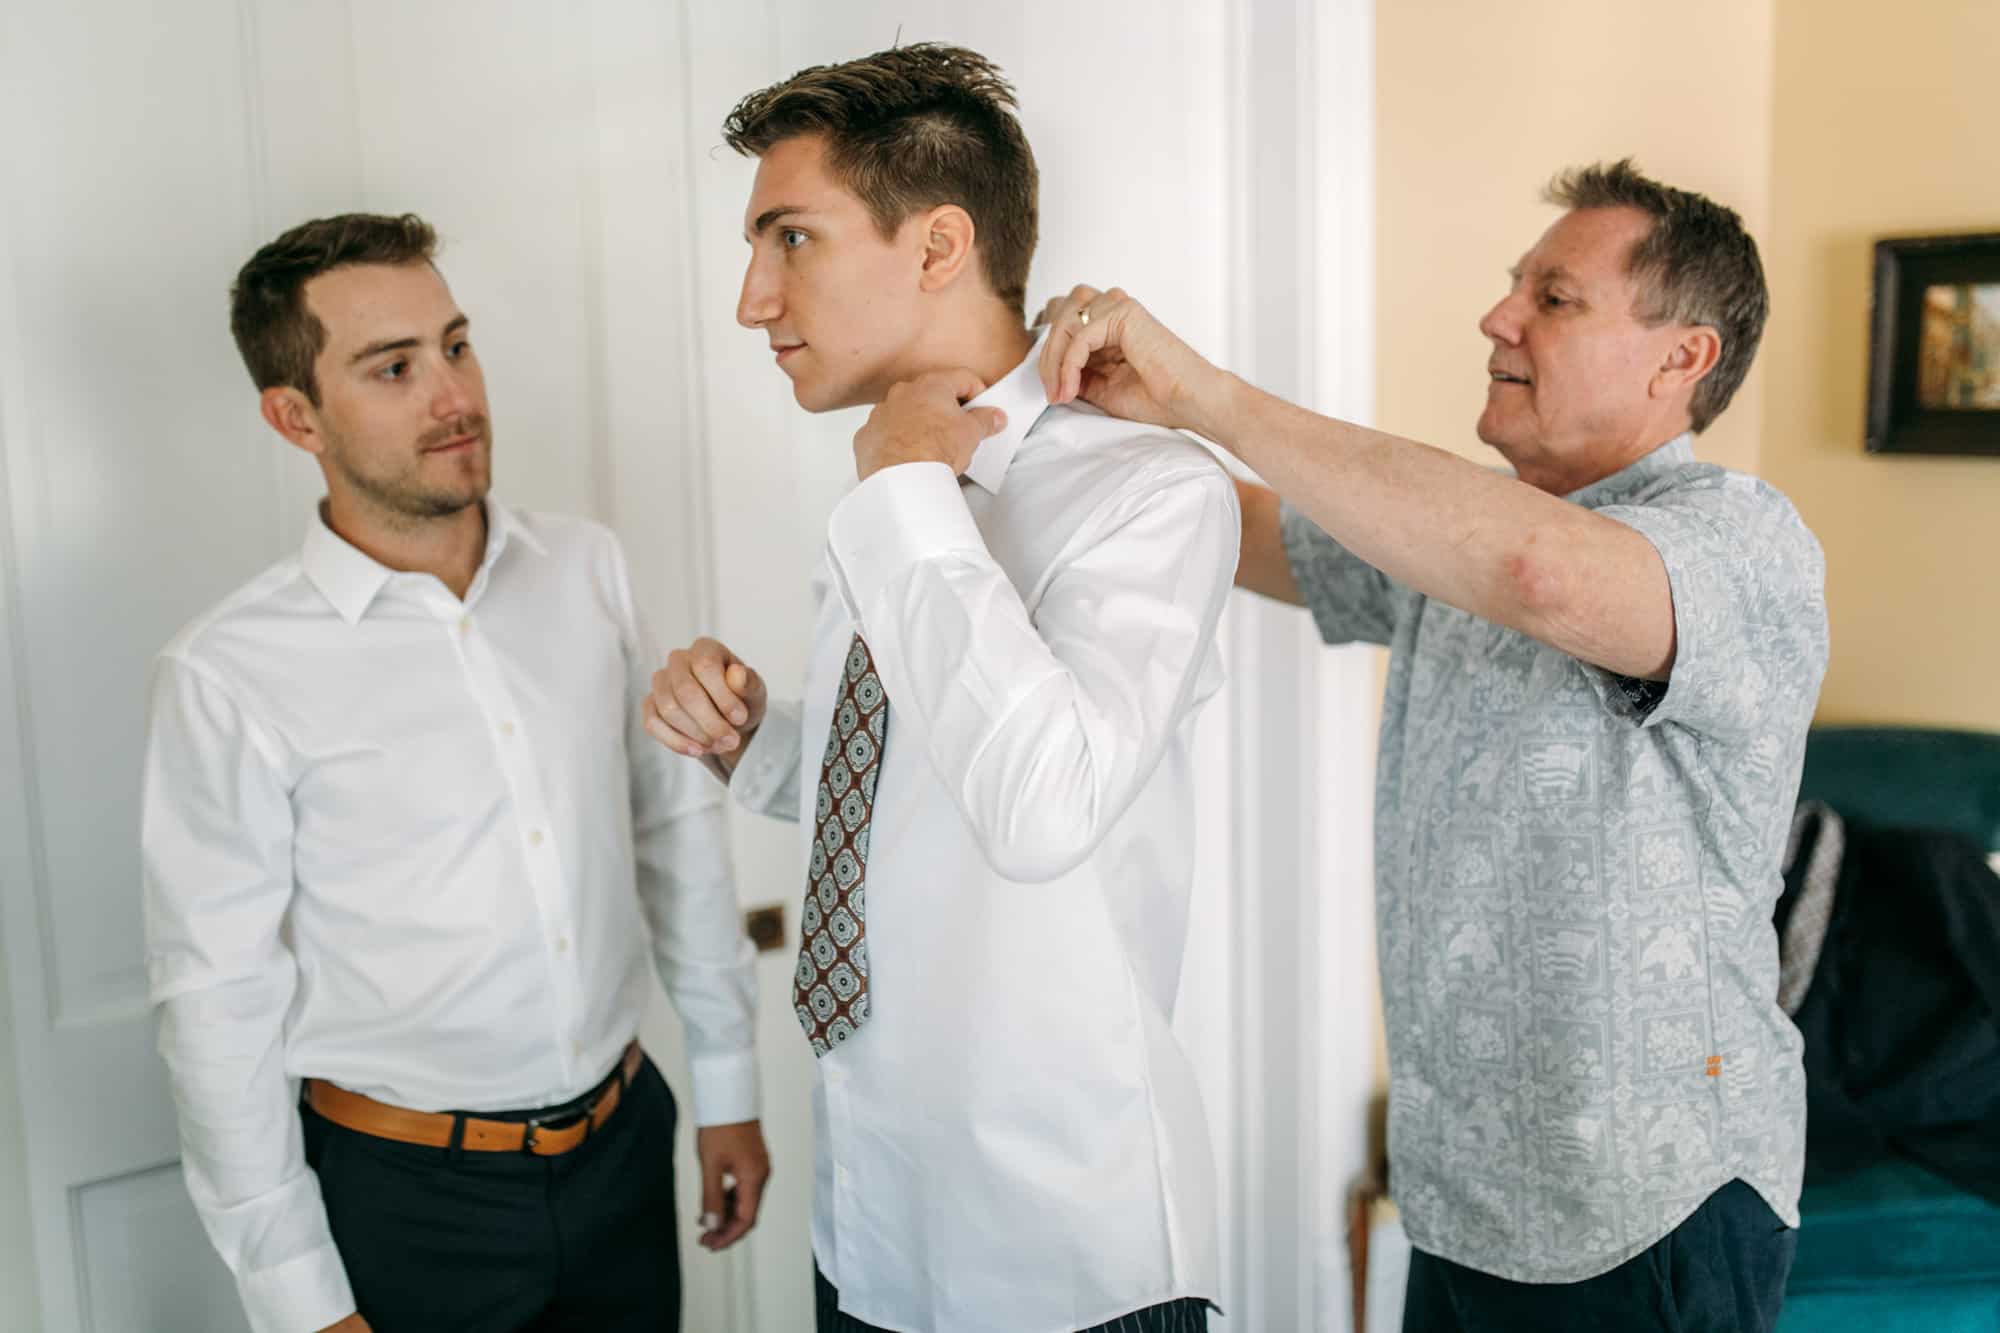 groom getting ready, getting ready at airbnb, groom tie ideas, groom tie, colorado wedding, colorado wedding venue, colorado wedding photographer, groom with dad, groom getting ready with guys, groom getting ready with dad and brother